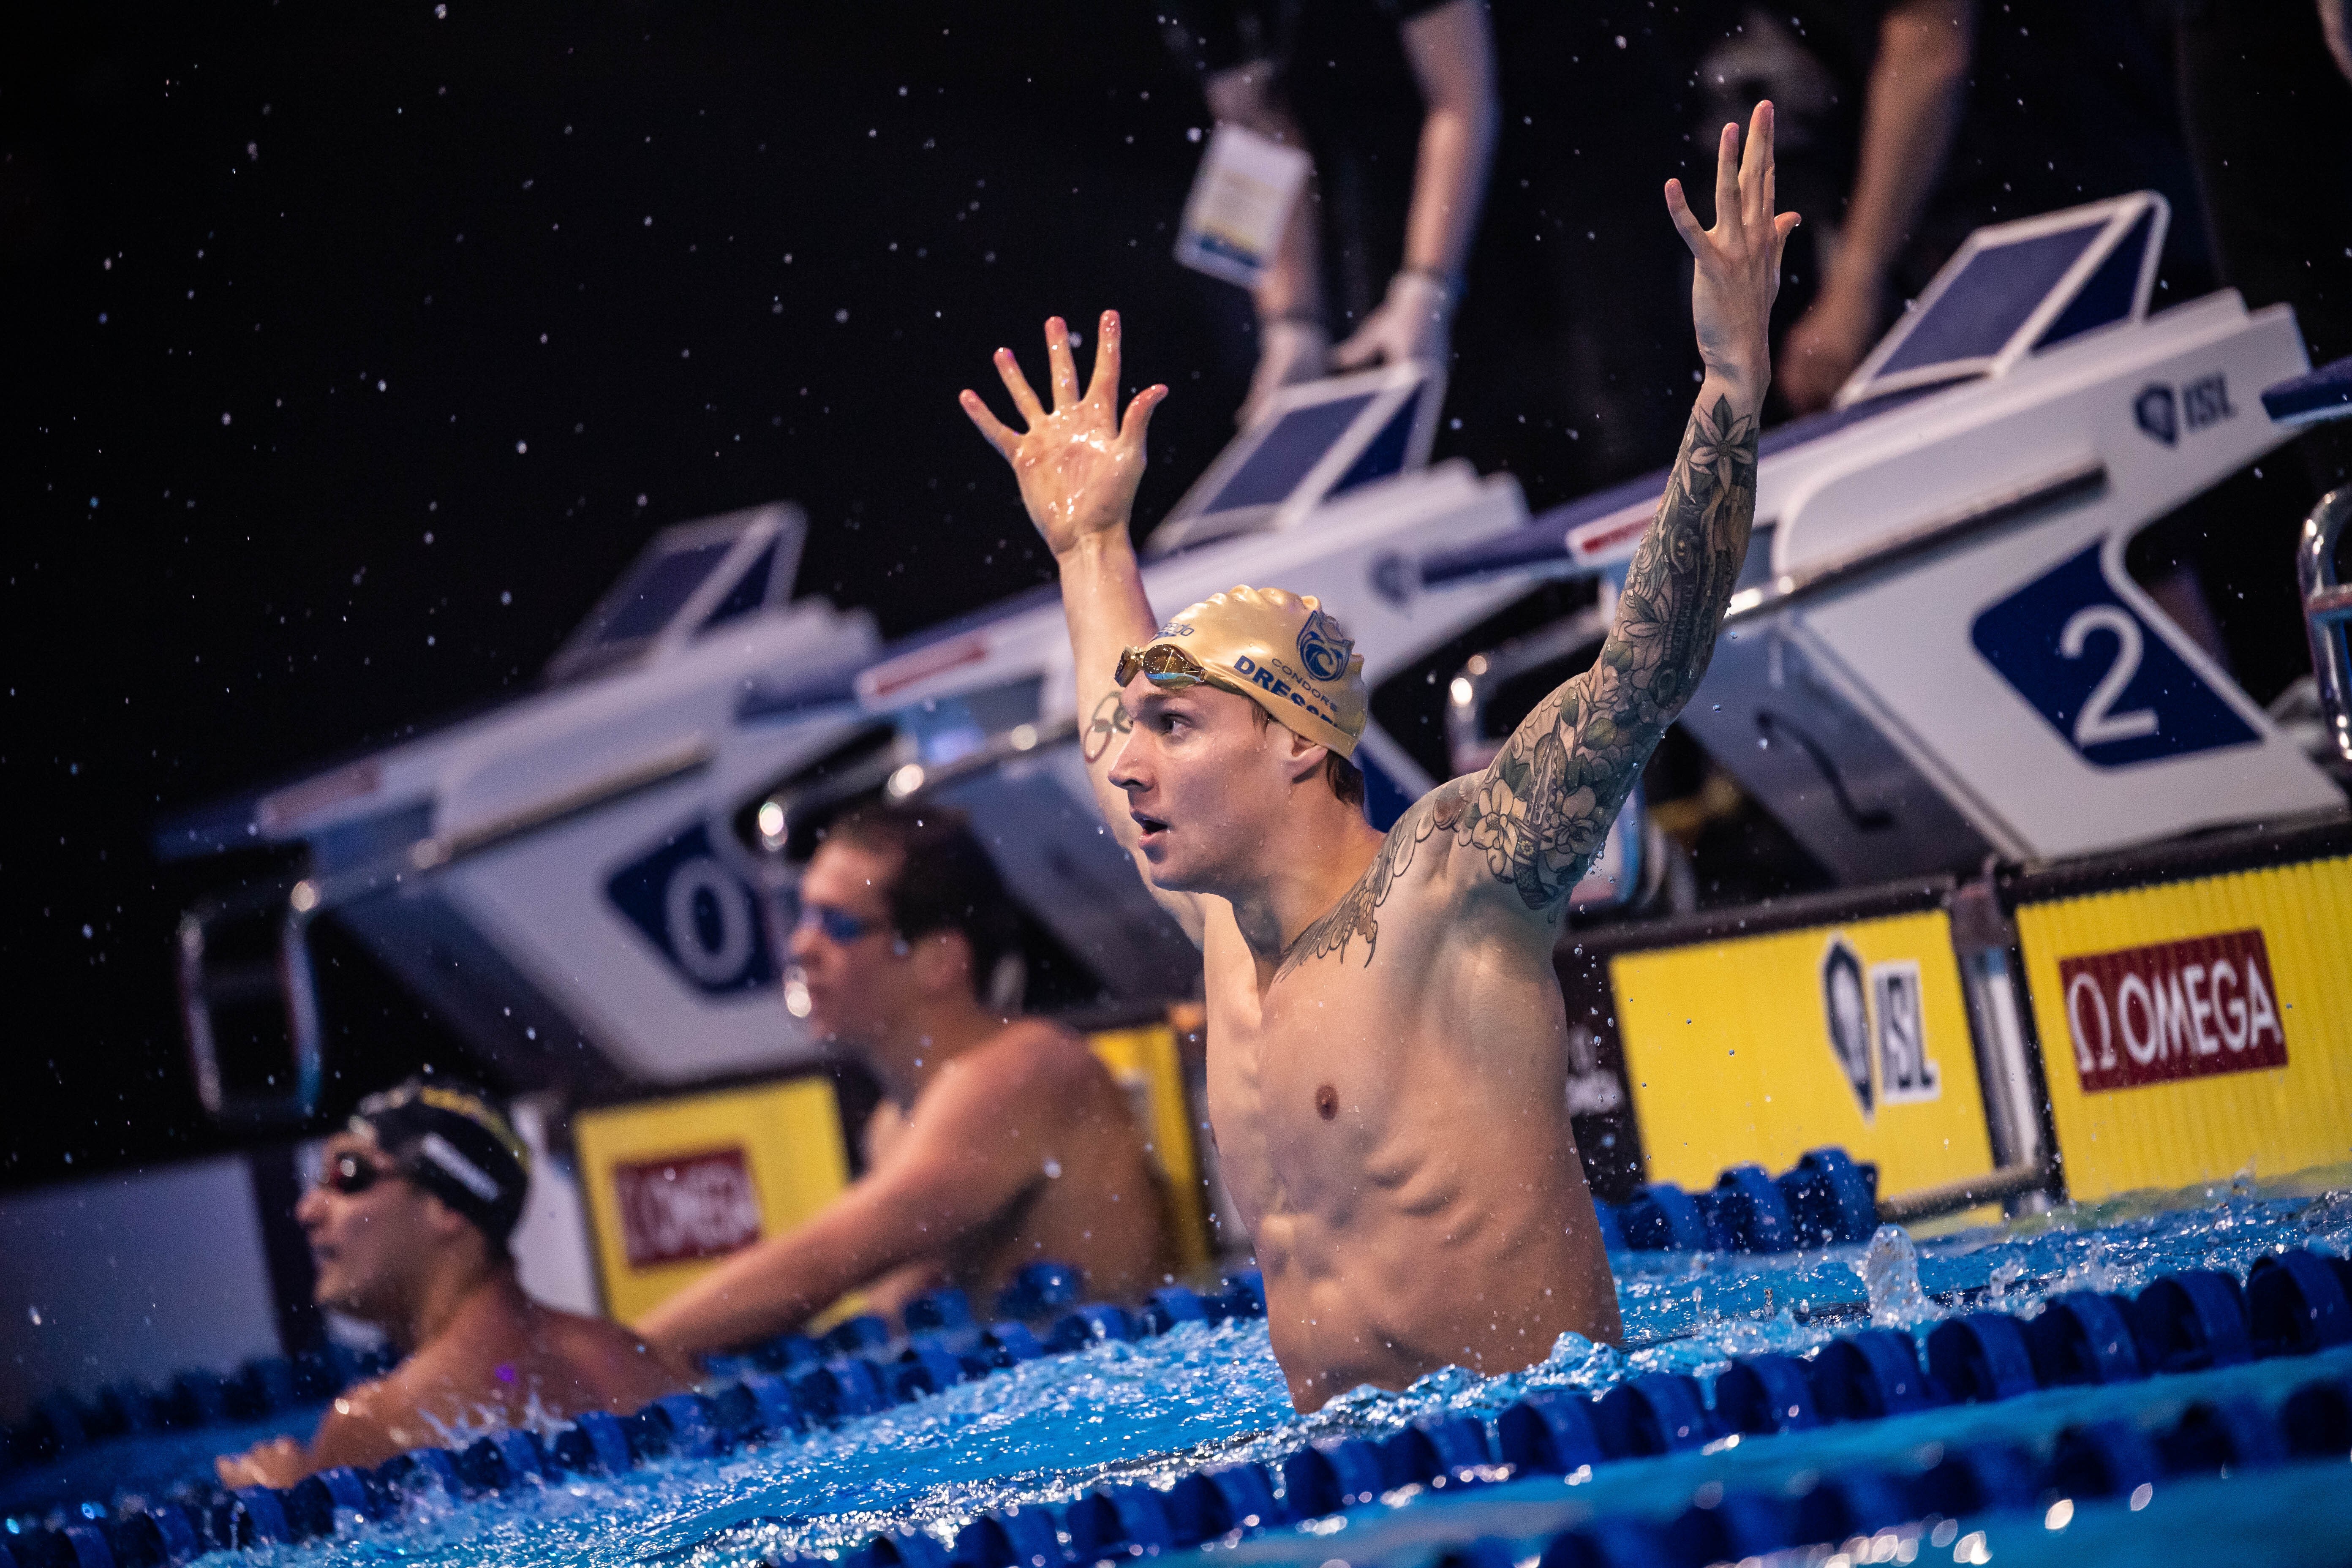 Cali Condors star Caeleb Dressel sets a world record in the 100m butterfly at the ISL finals in Budapest, Hungary. Photo: ISL/Mike Lewis